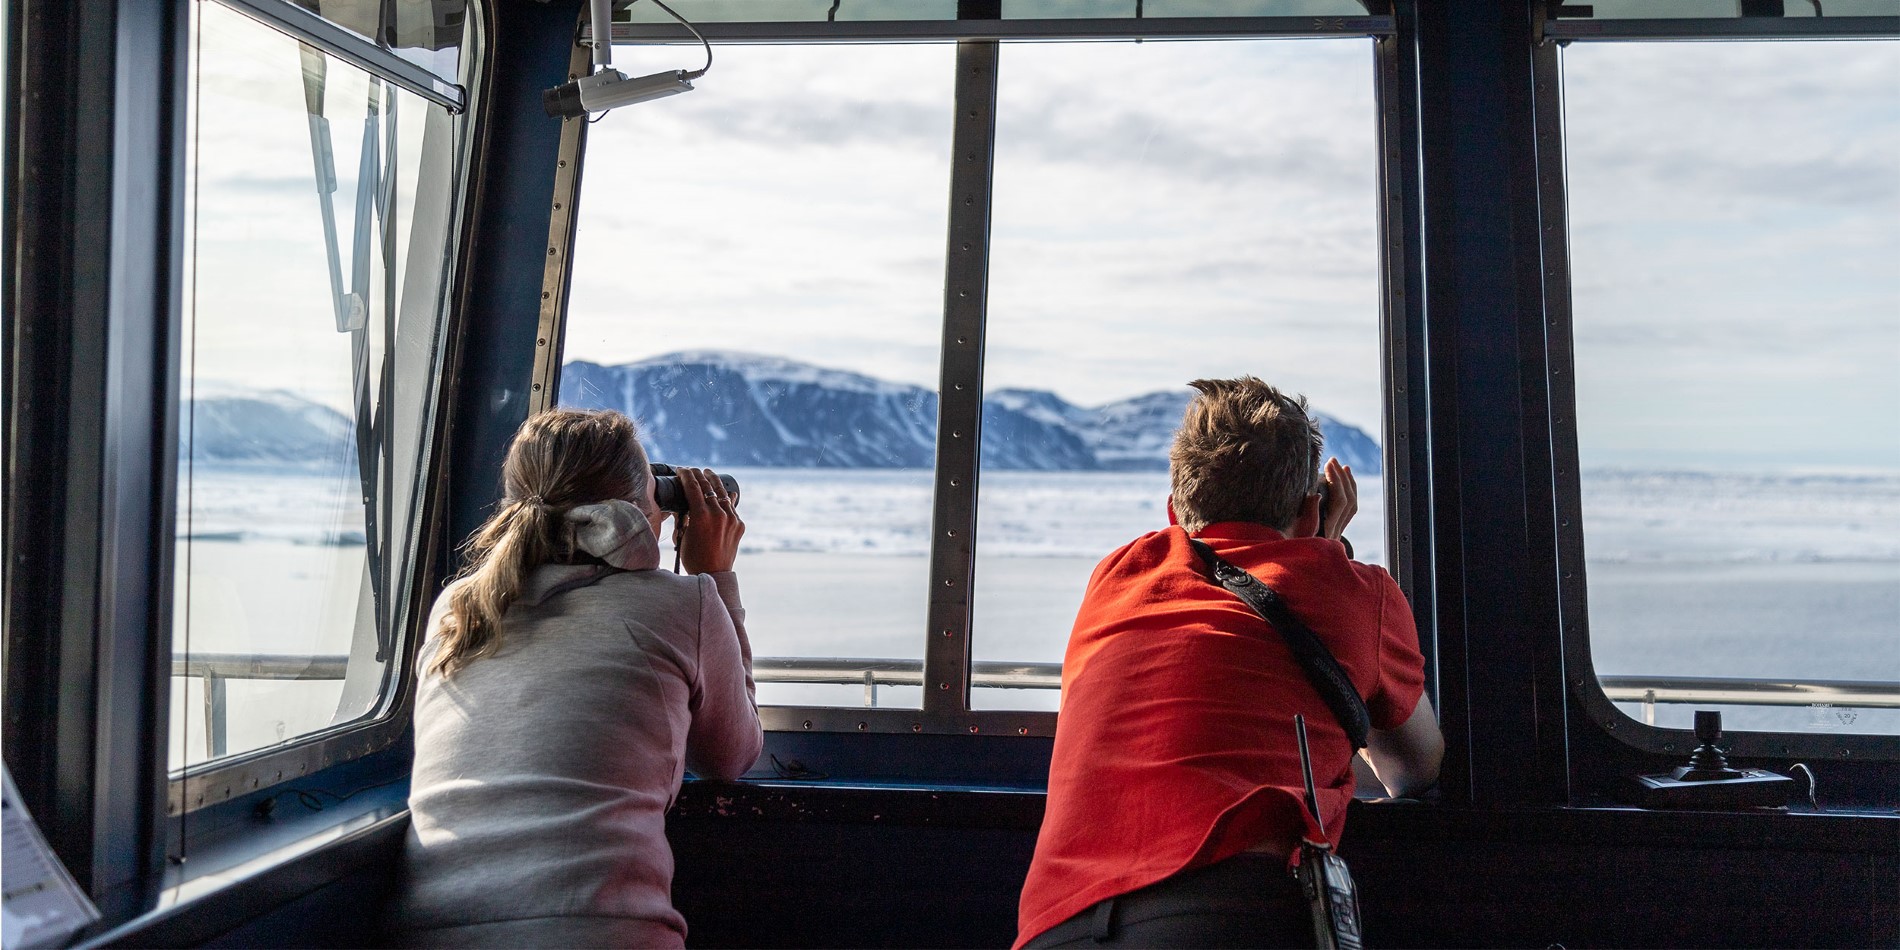 Guest and crewmember using binoculars in observation room - Photo Credit: Genna Roland